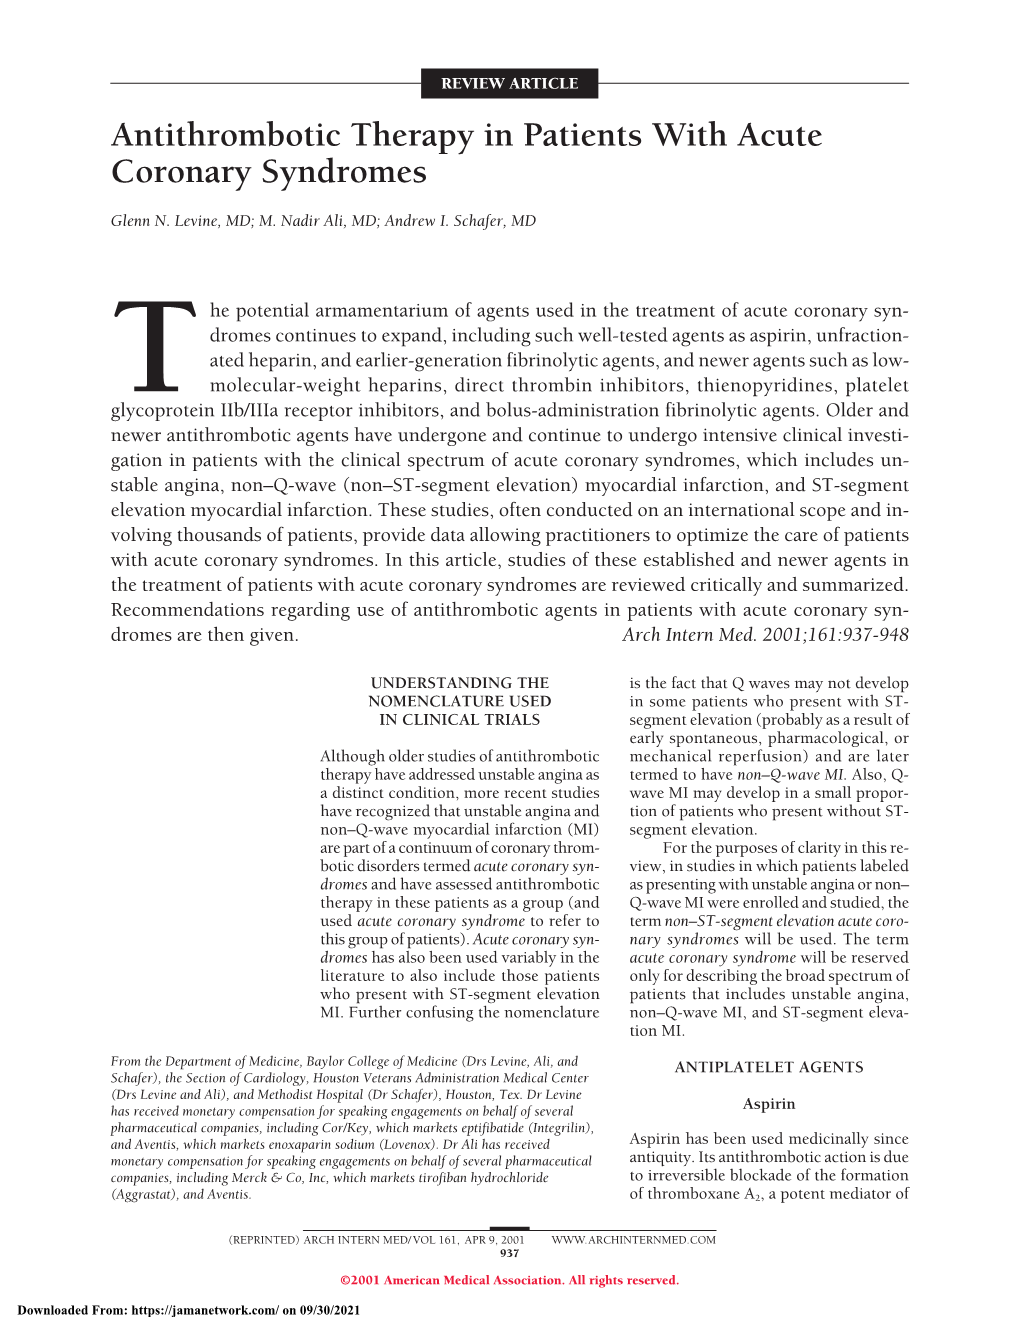 Antithrombotic Therapy in Patients with Acute Coronary Syndromes